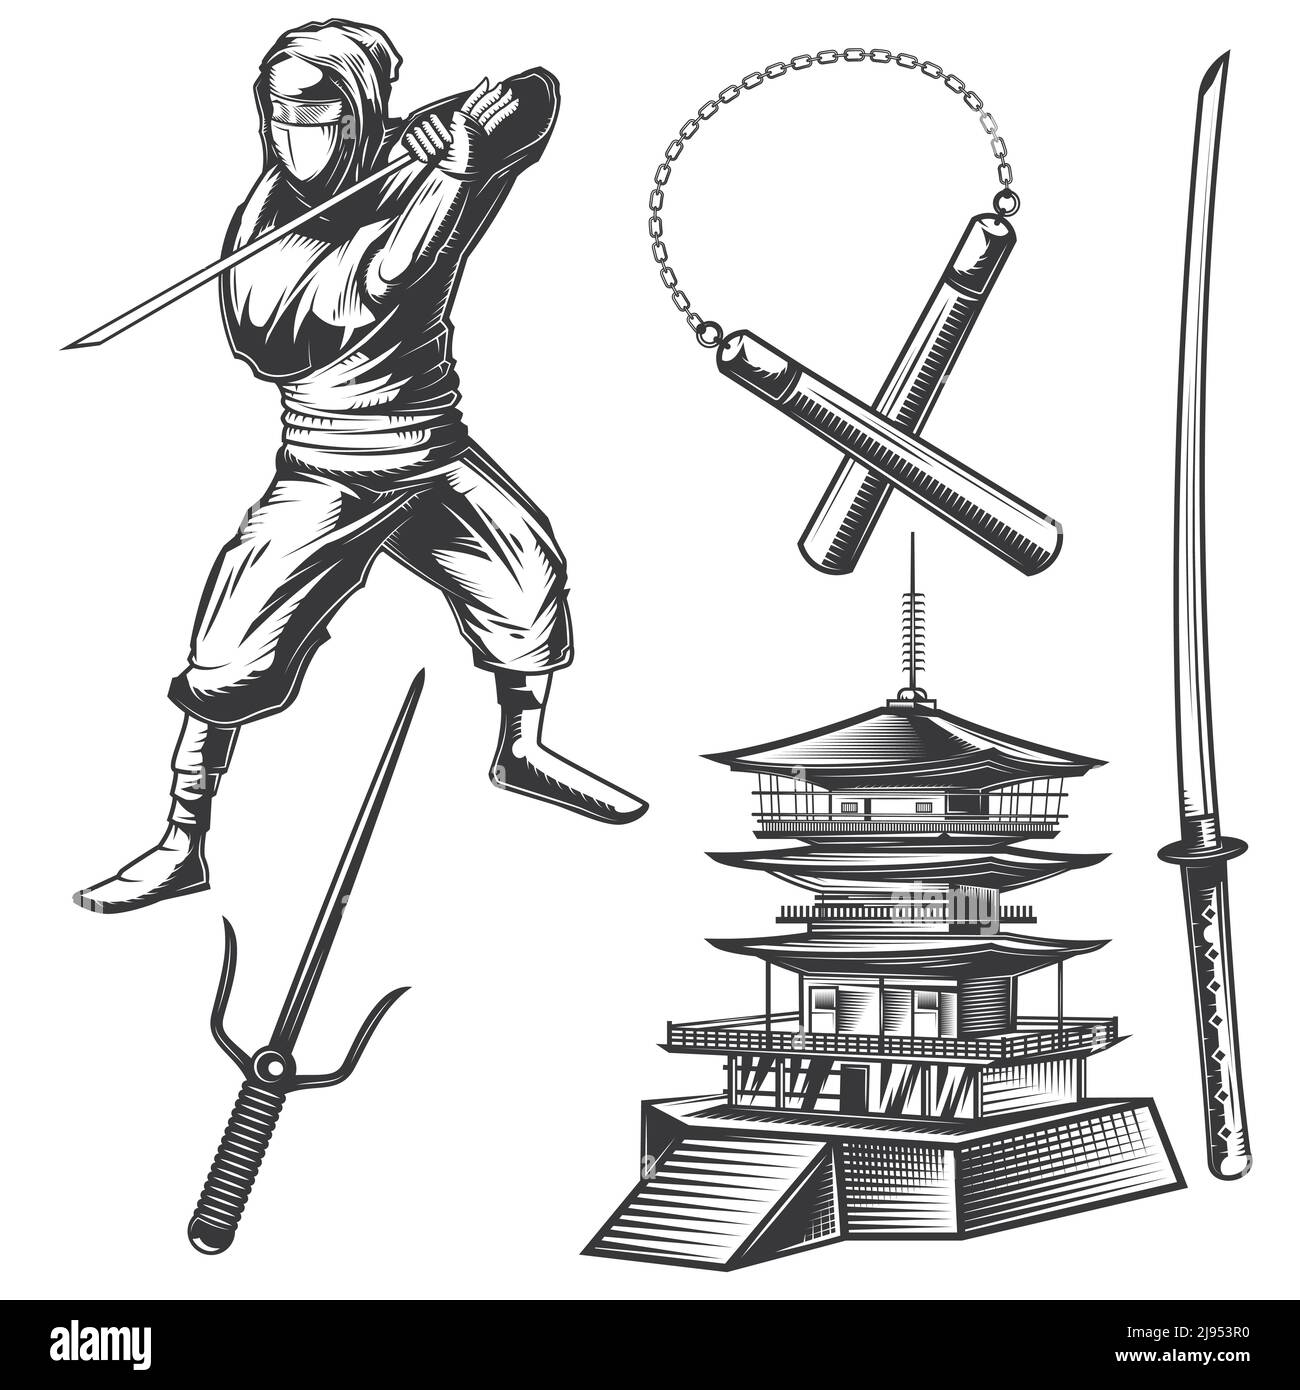 https://c8.alamy.com/comp/2J953R0/set-of-a-ninja-elements-pagoda-katana-nunchuck-etc-for-creating-your-own-badges-logos-labels-posters-etc-isolated-on-white-2J953R0.jpg